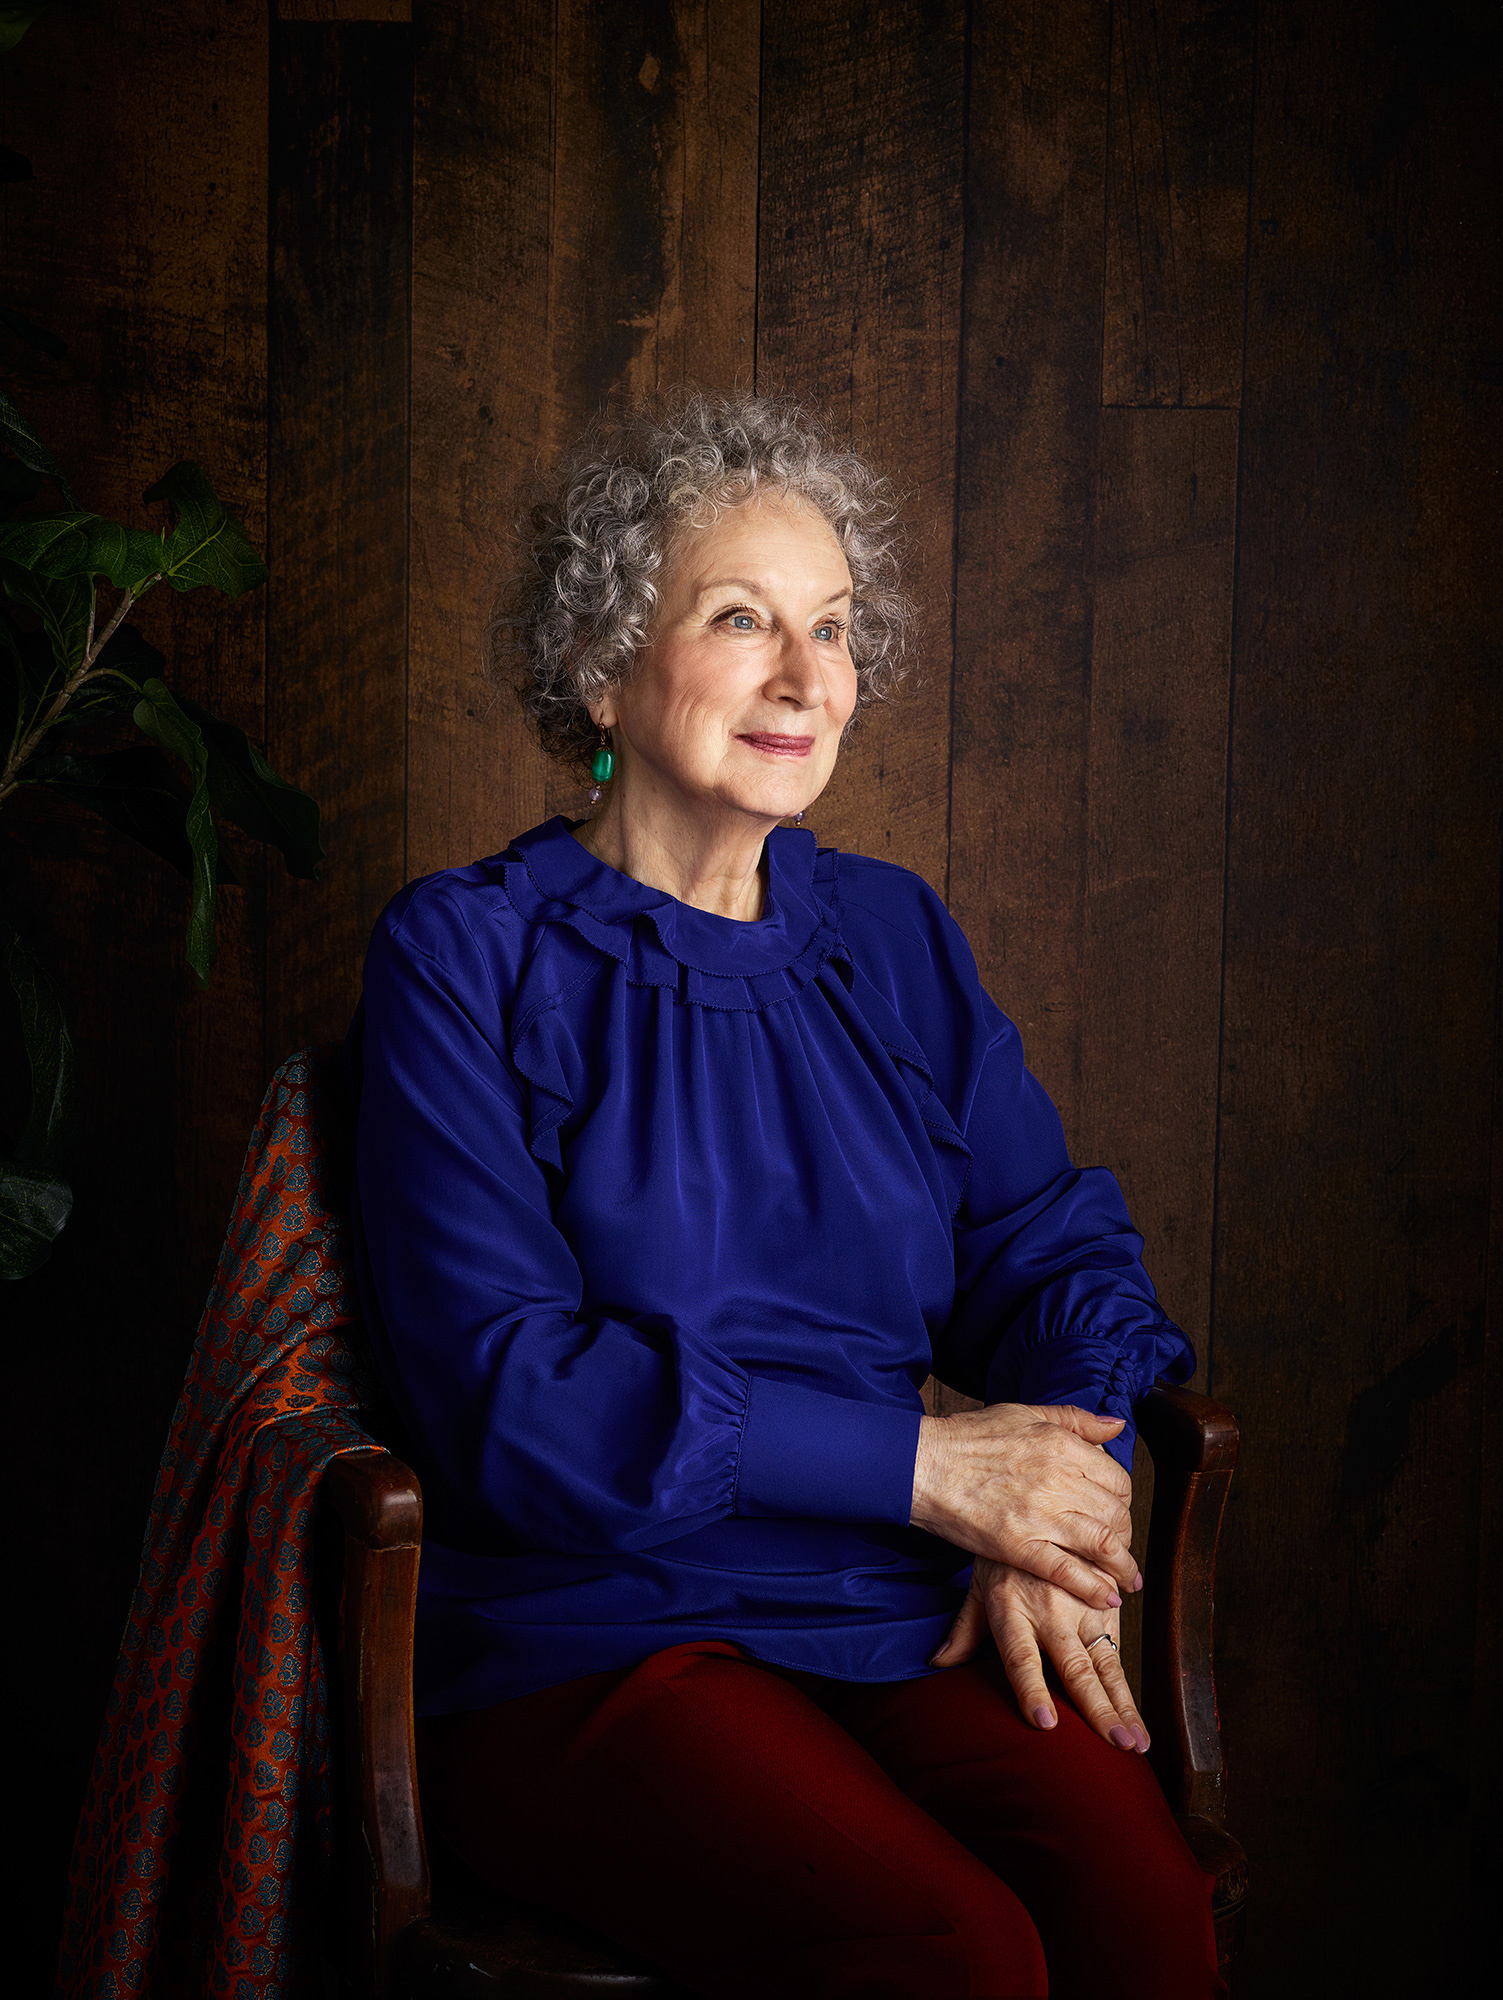 Margaret Atwood. "The Best of Fall," Sept. 16 issue. (Mickalene Thomas for TIME)